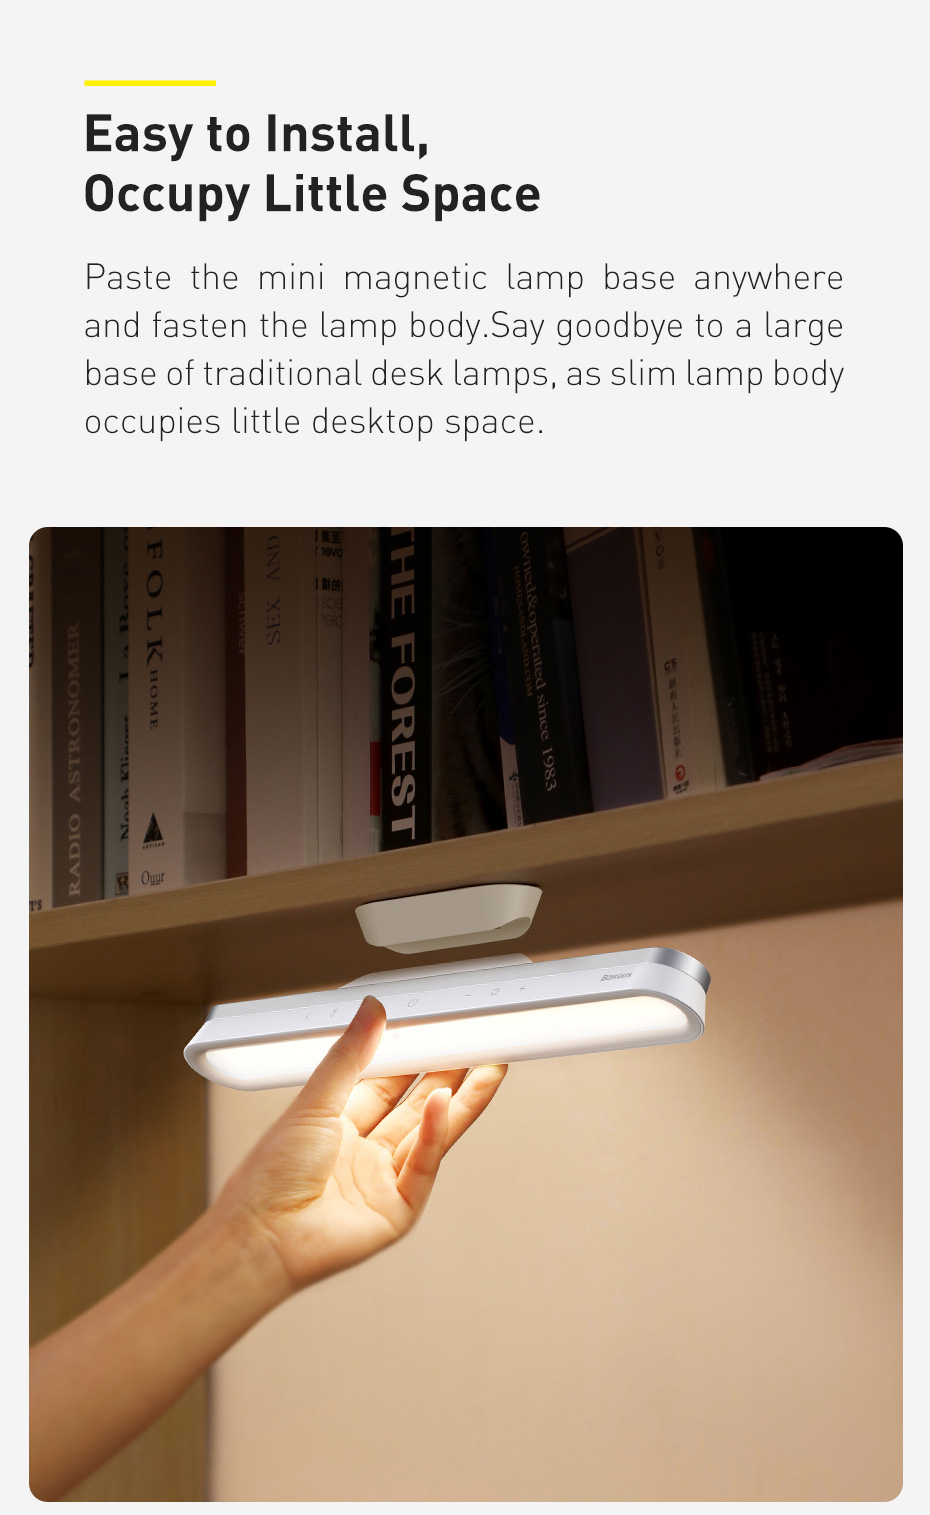 Baseus-Desk-Lamp-Hanging-Magnetic-LED-Table-Lamp-Chargeable-Stepless-Dimming-Cabinet-Light-Night-Lig-1755382-3